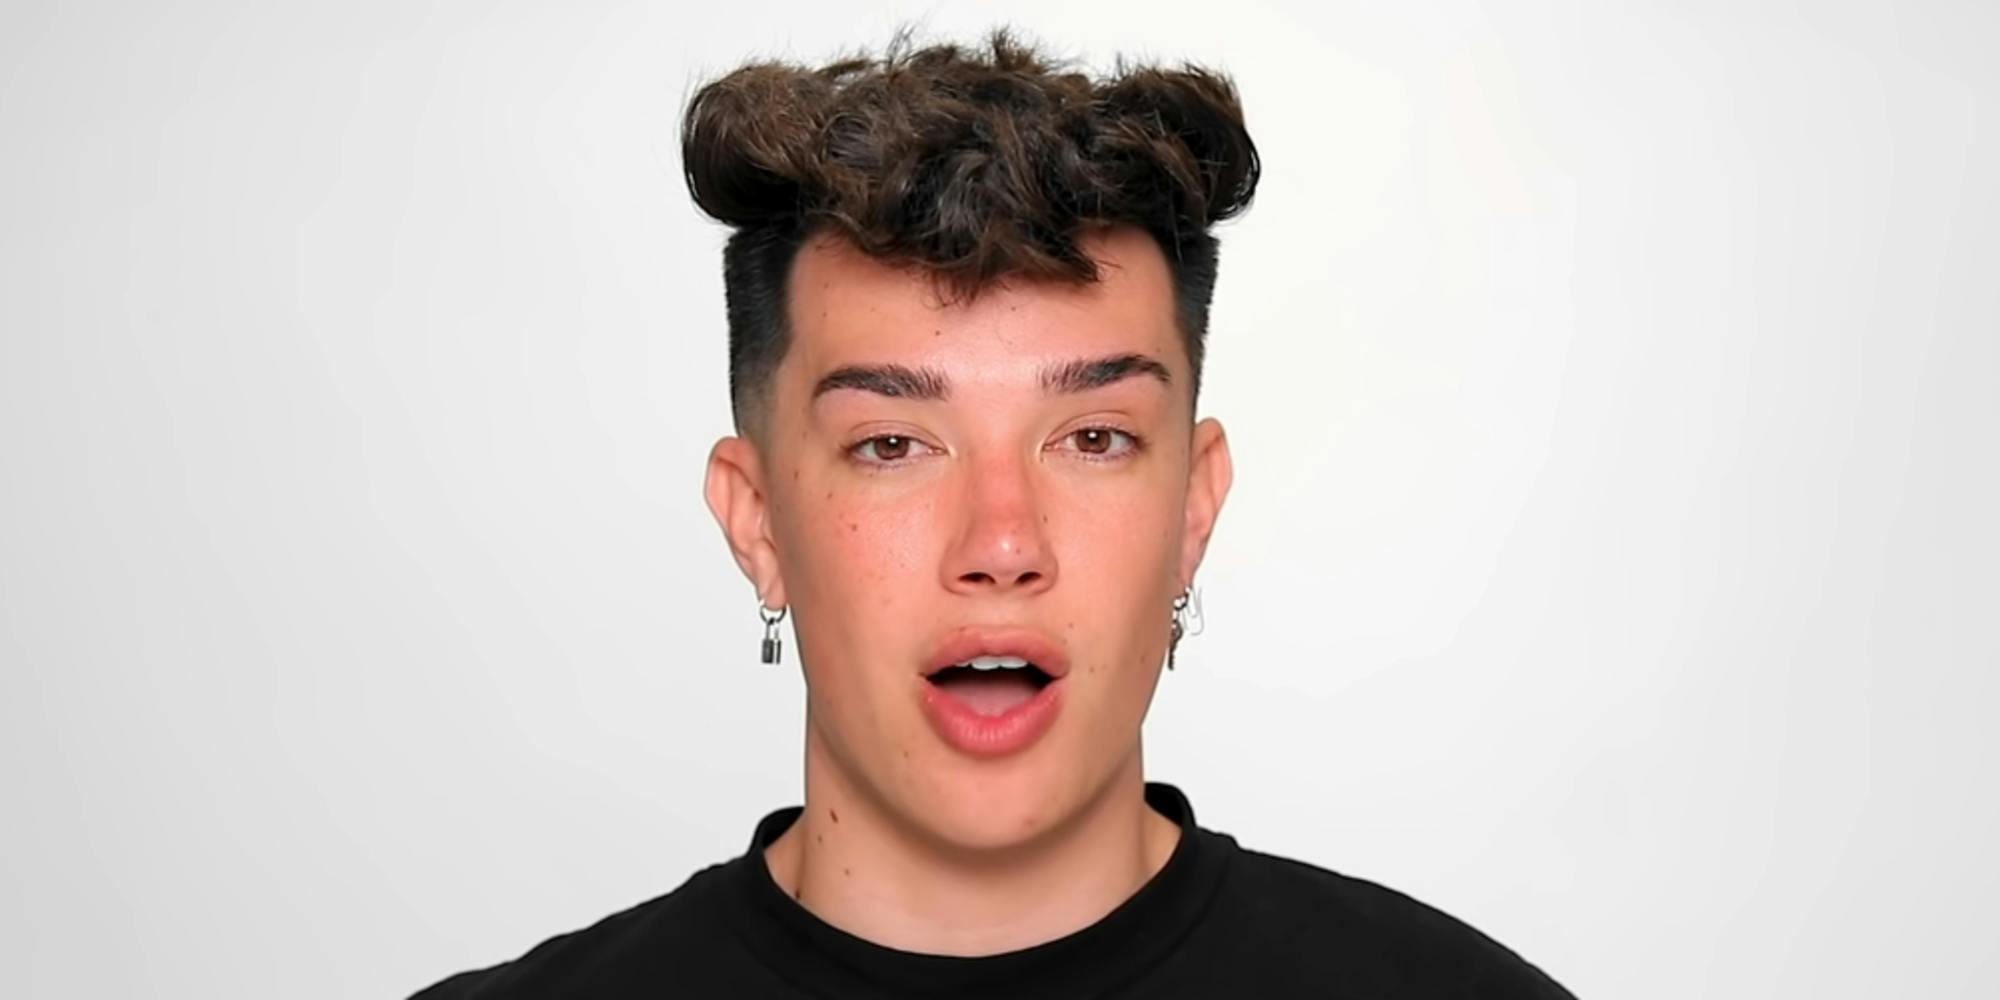 James Charles' Channel Temporarily By YouTube